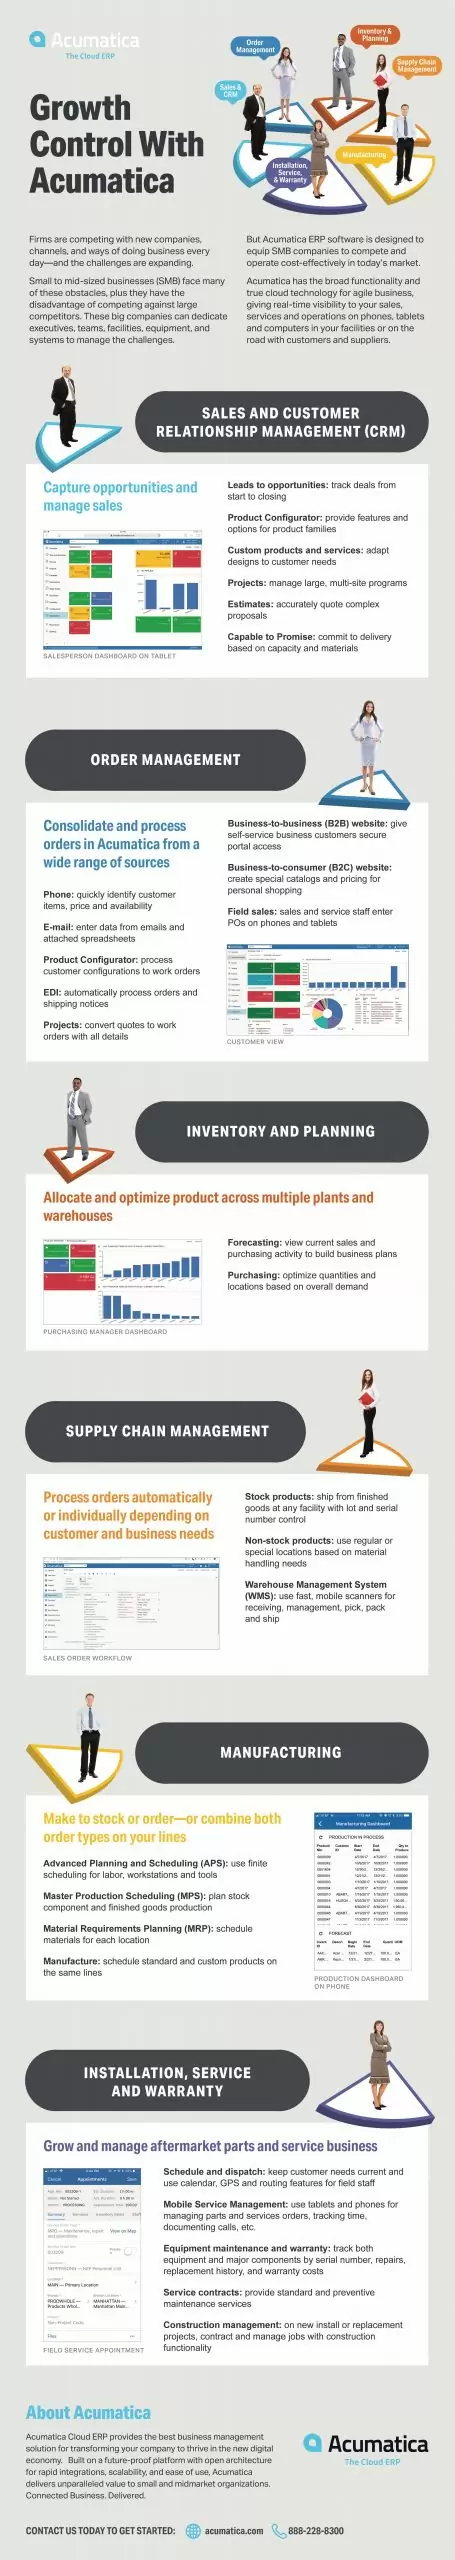 Infographic-Growth-Control-With-Acumatica-190815